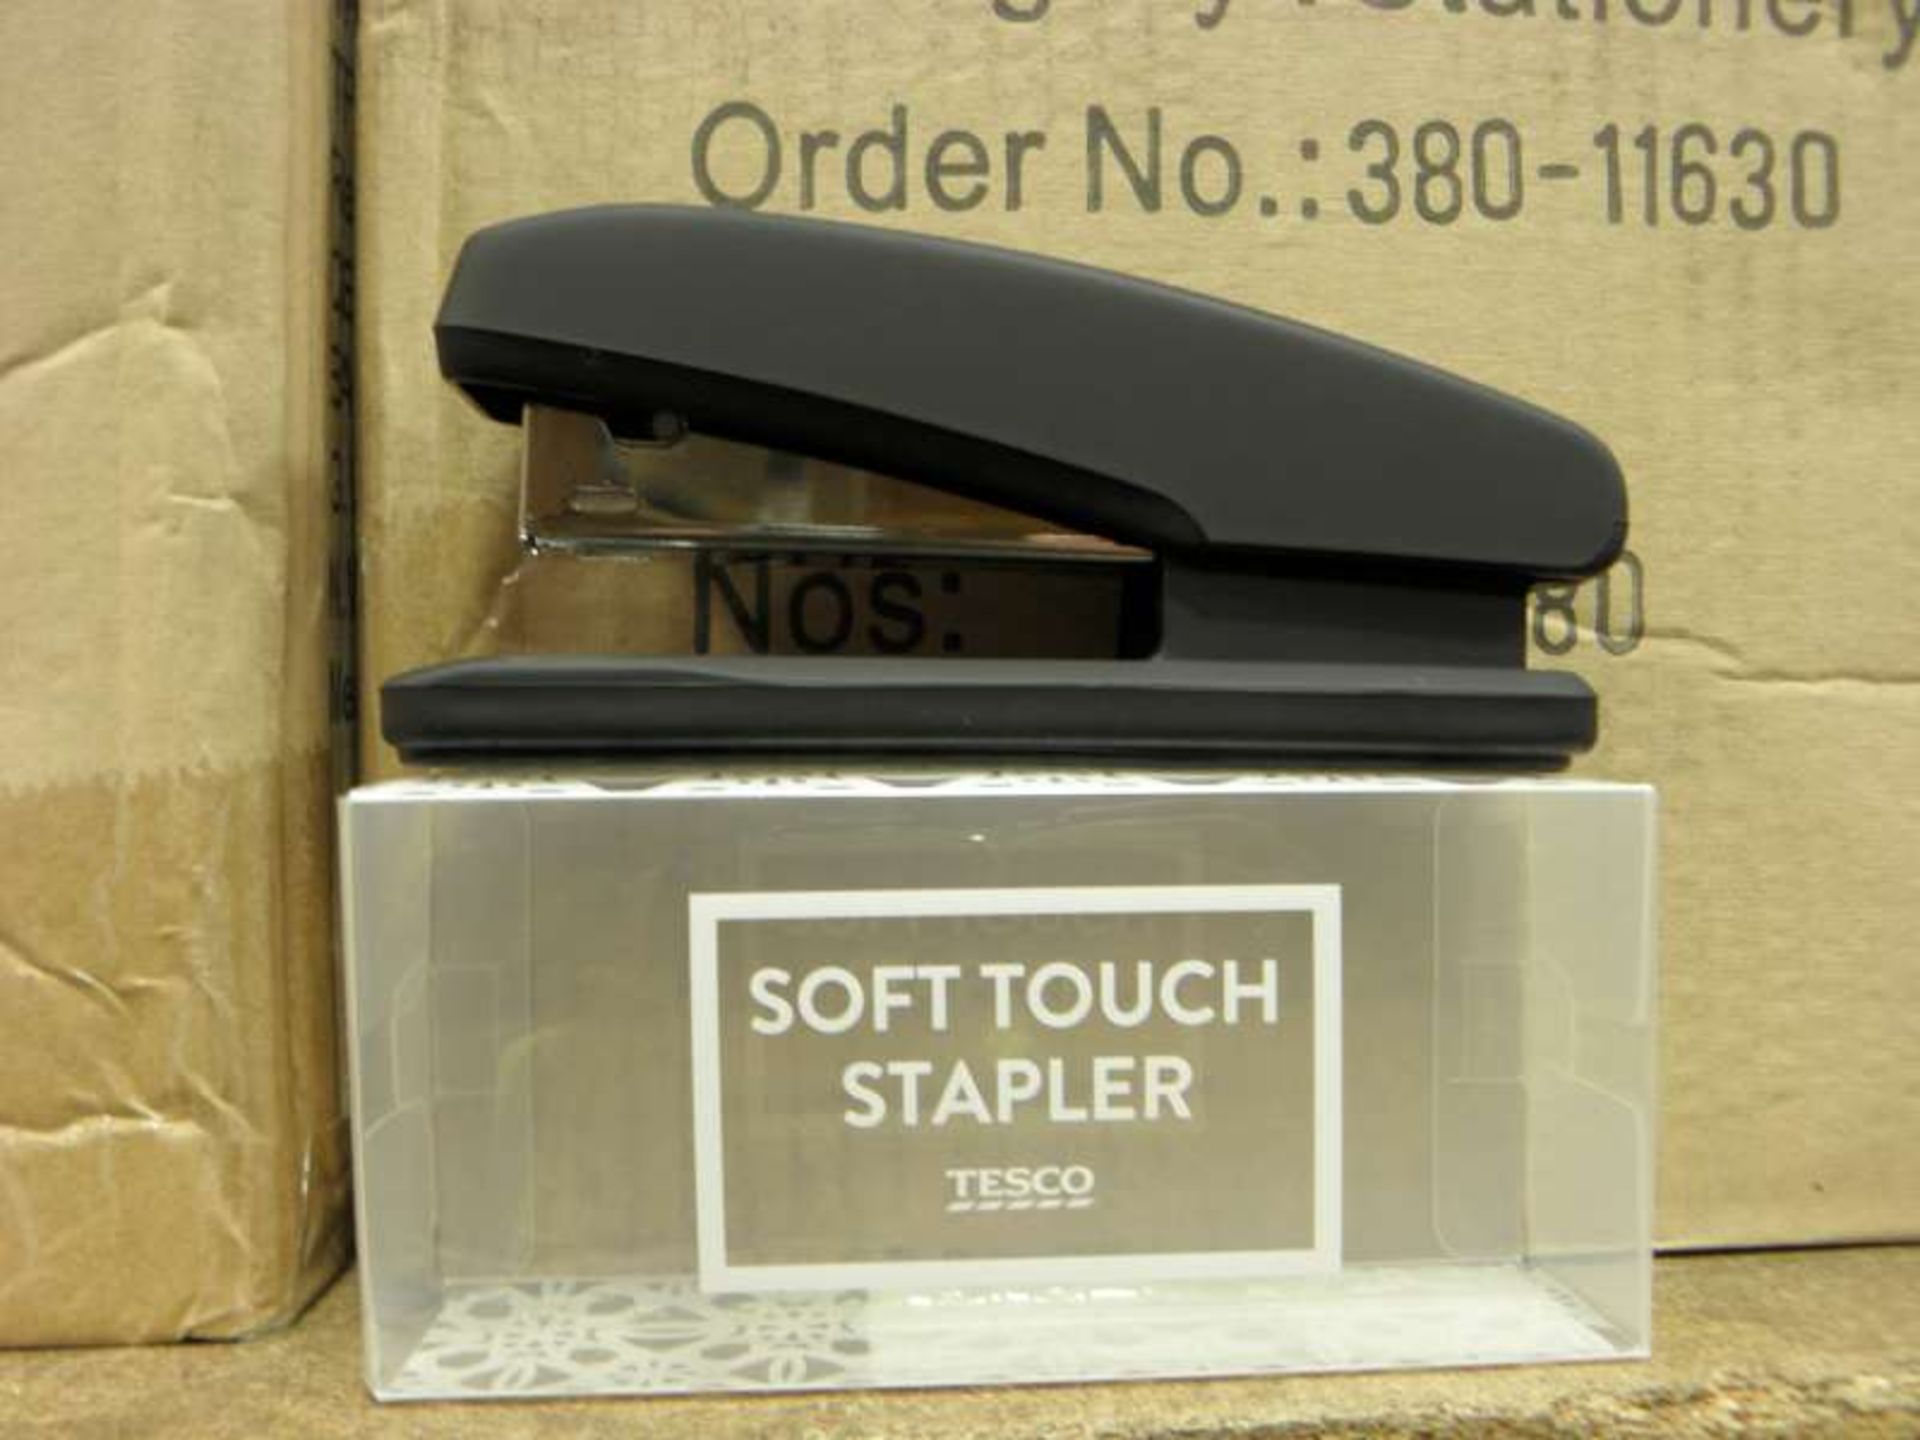 400 X SOFT TOUCH STAPLERS IN 10 BOXES